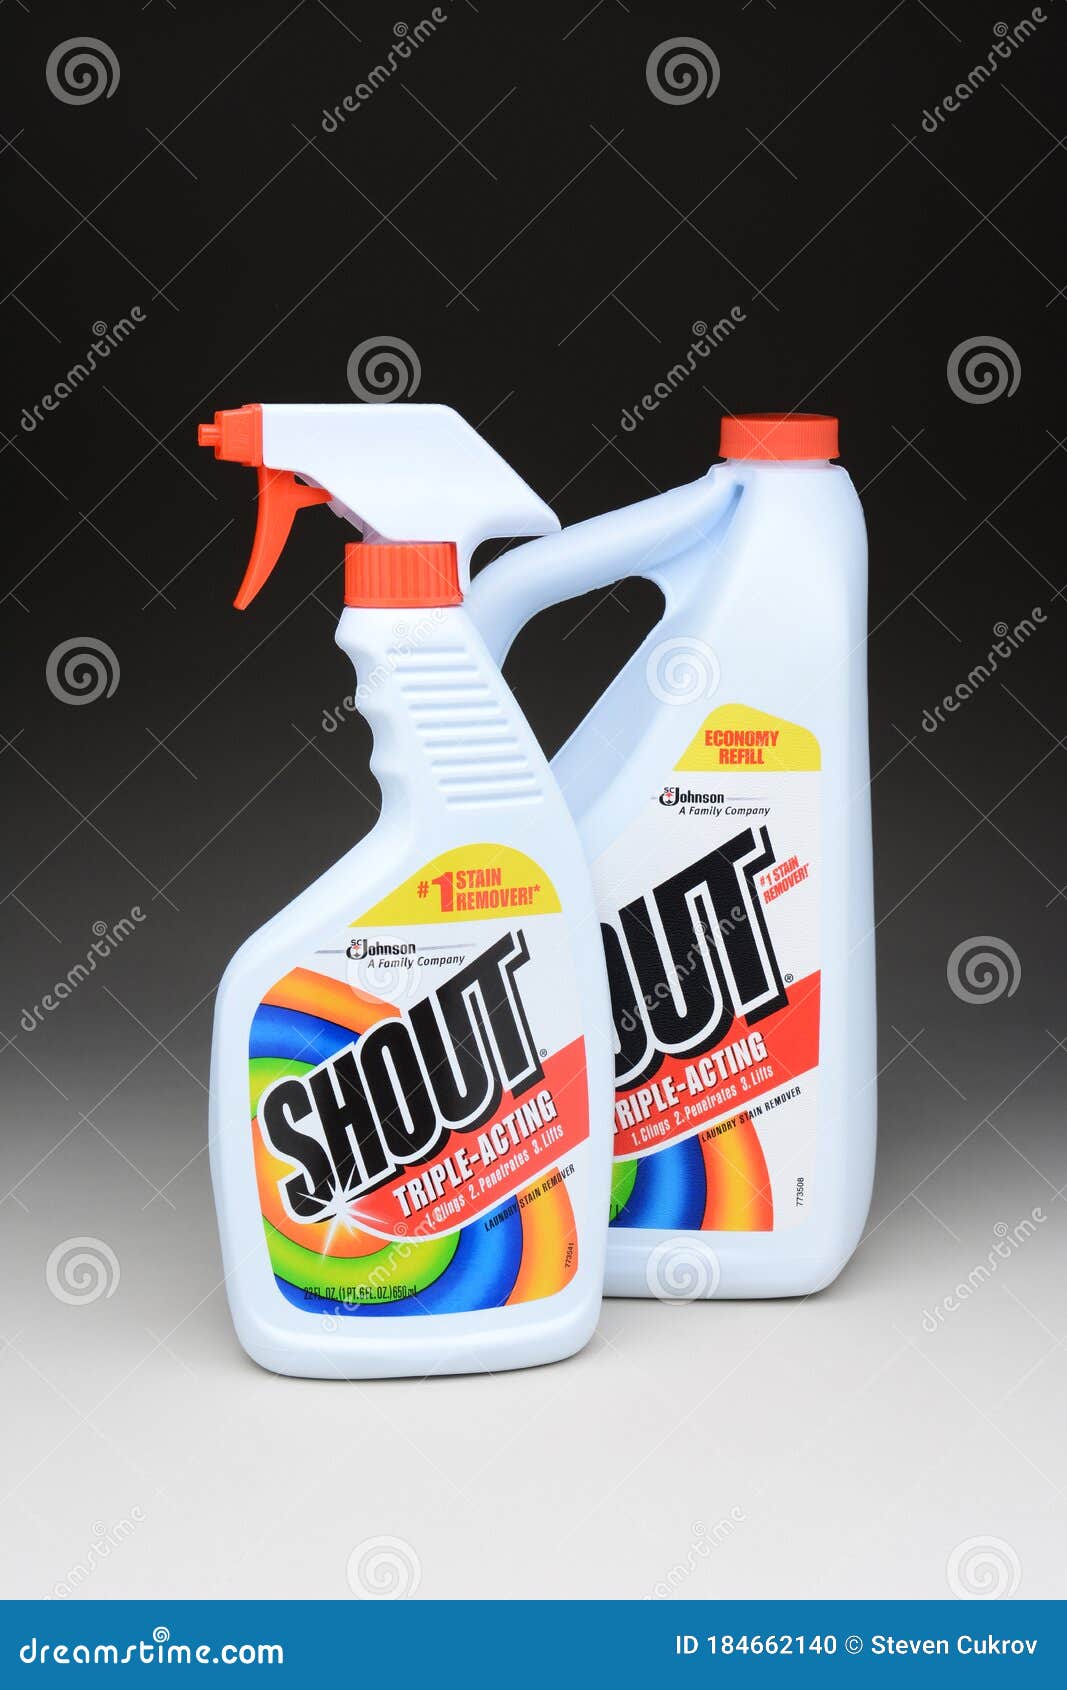 https://thumbs.dreamstime.com/z/shout-laundry-stain-remover-irvine-ca-january-oz-bottle-refill-products-designed-to-help-remove-stains-clothing-184662140.jpg